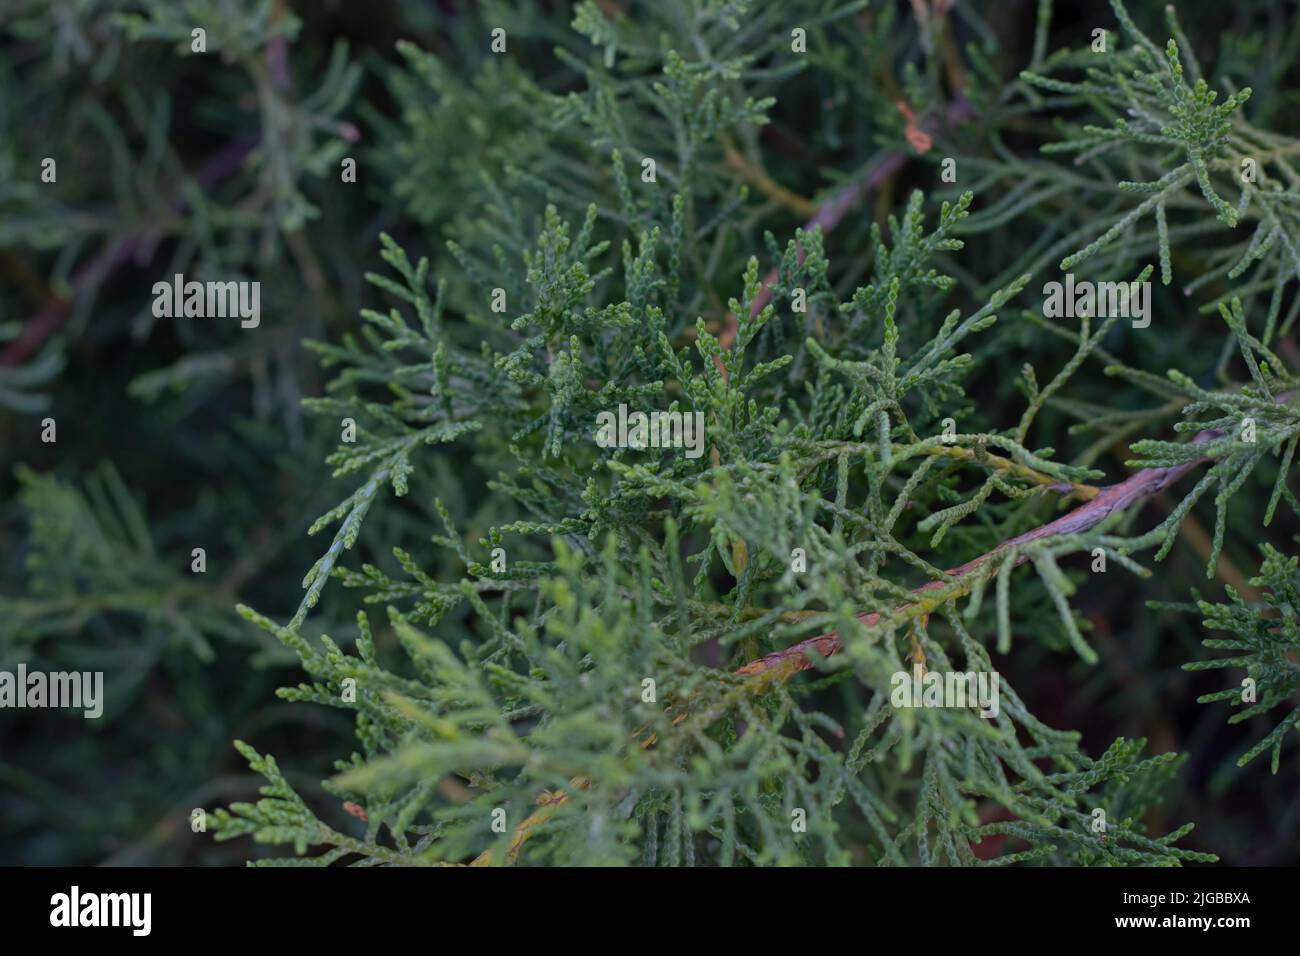 Green thuja tree close-up on a blurry background Stock Photo